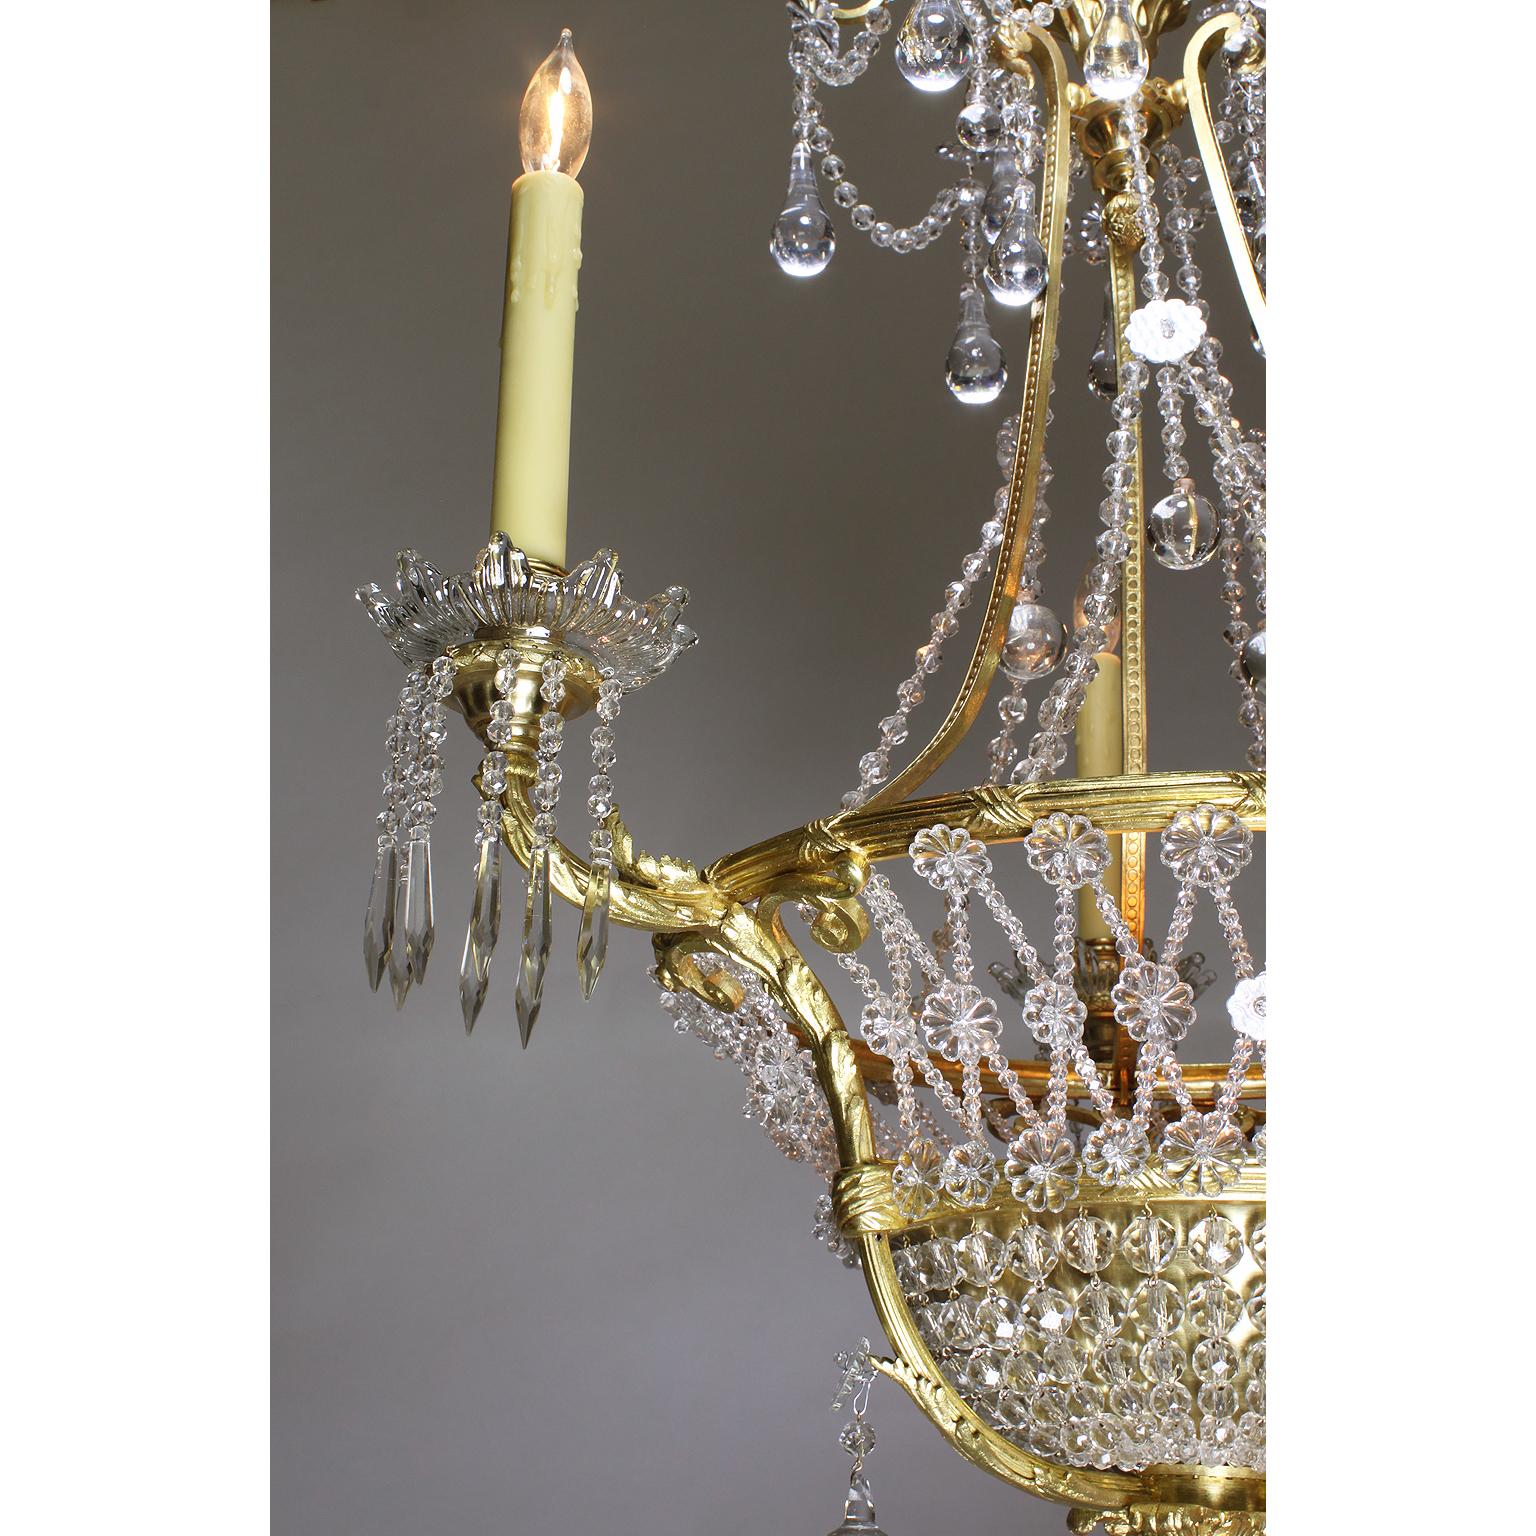 Early 20th Century Fine French Belle Époque 19th-20th Century Gilt-Bronze and Cut-Glass Chandelier For Sale